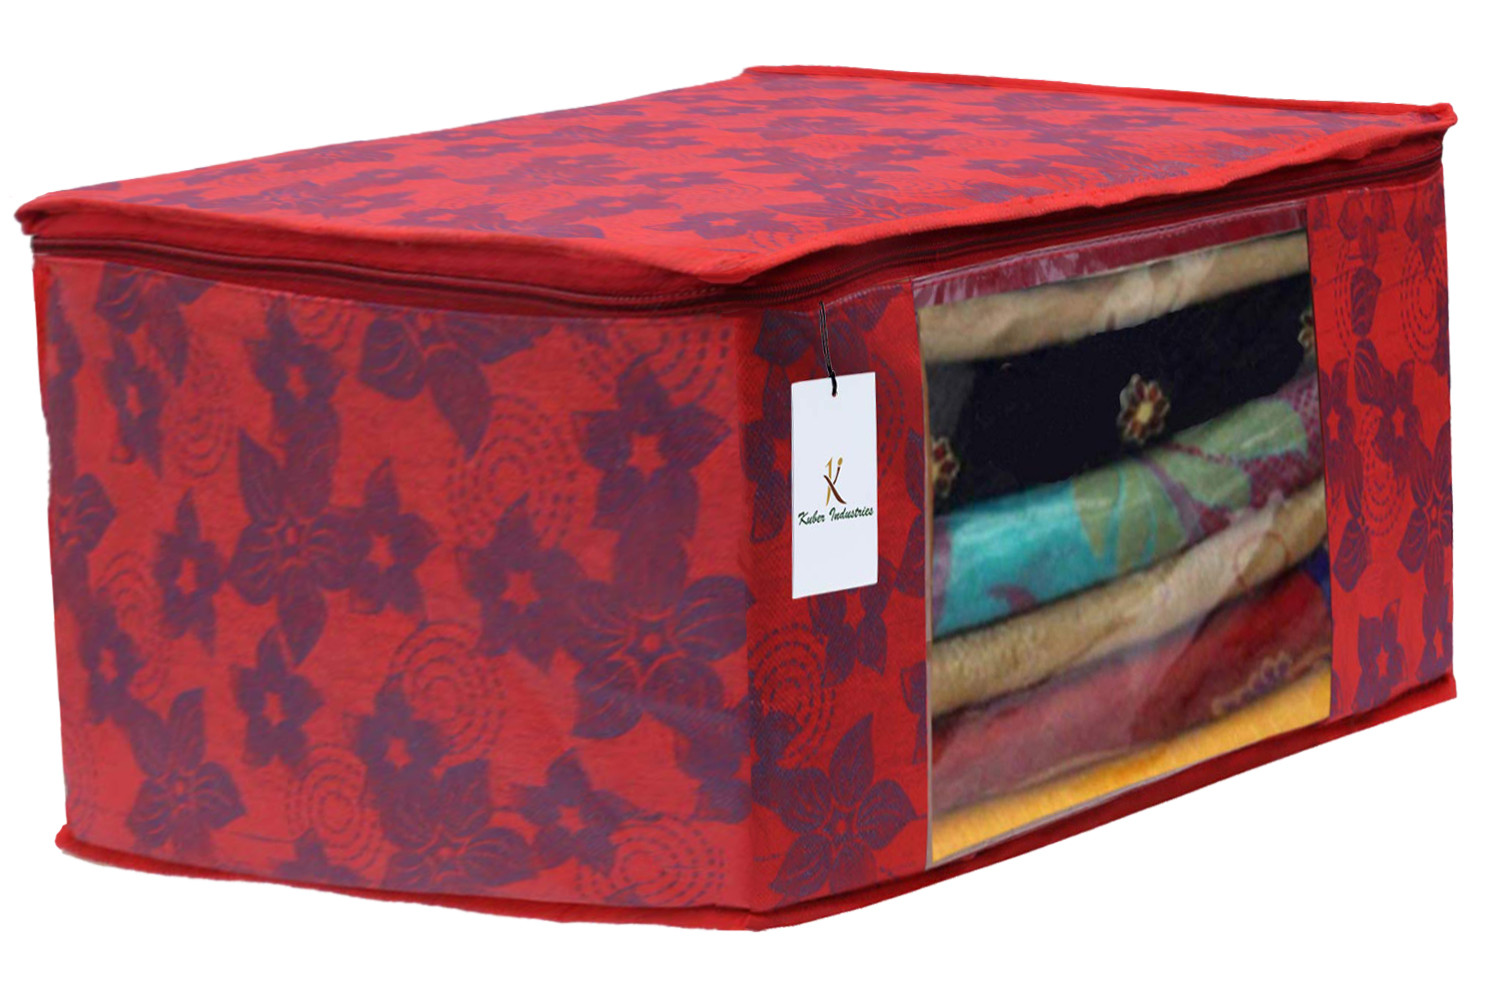 Kuber Industries Metalic Printed Non Woven Saree Cover And Underbed Storage Bag, Storage Organiser, Blanket Cover, Golden Brown & Red  -CTKTC42377